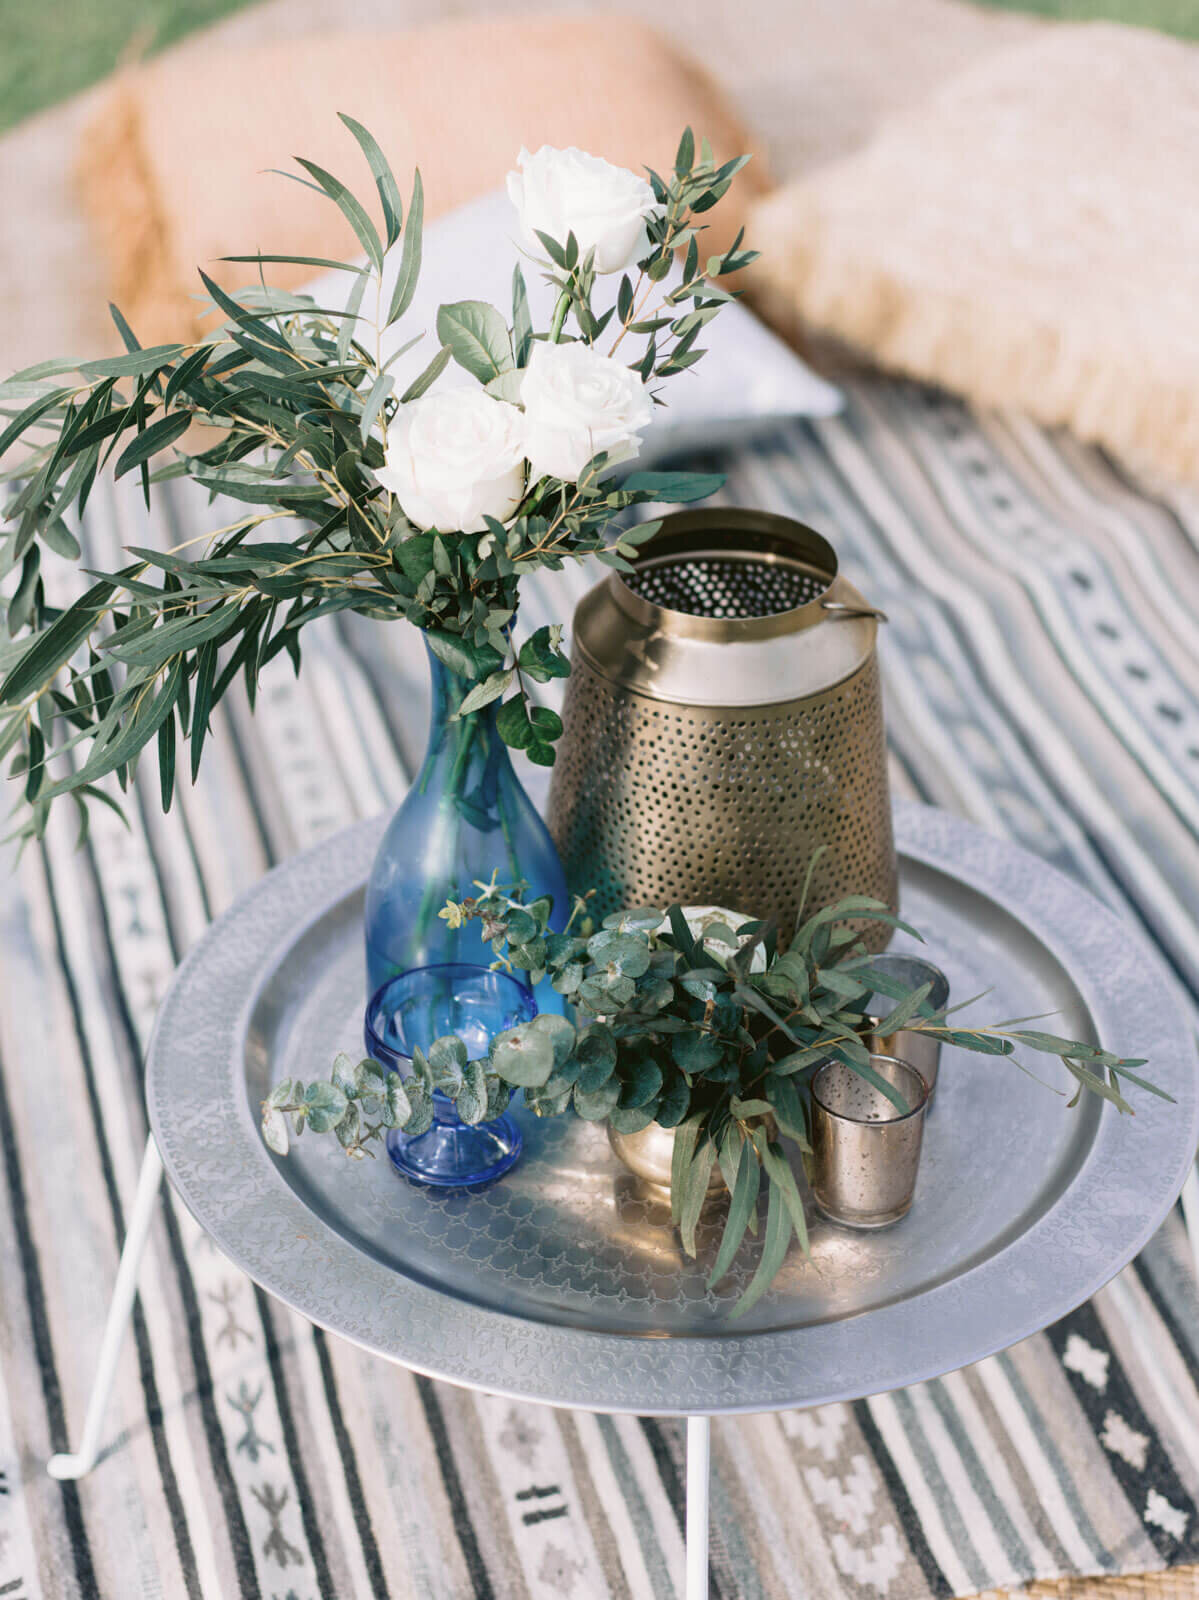 Indonesian bronze pot and cups and blue glass vase with white rose and leaves for a wedding at Bali, Indonesia. Image by Jenny Fu Studio